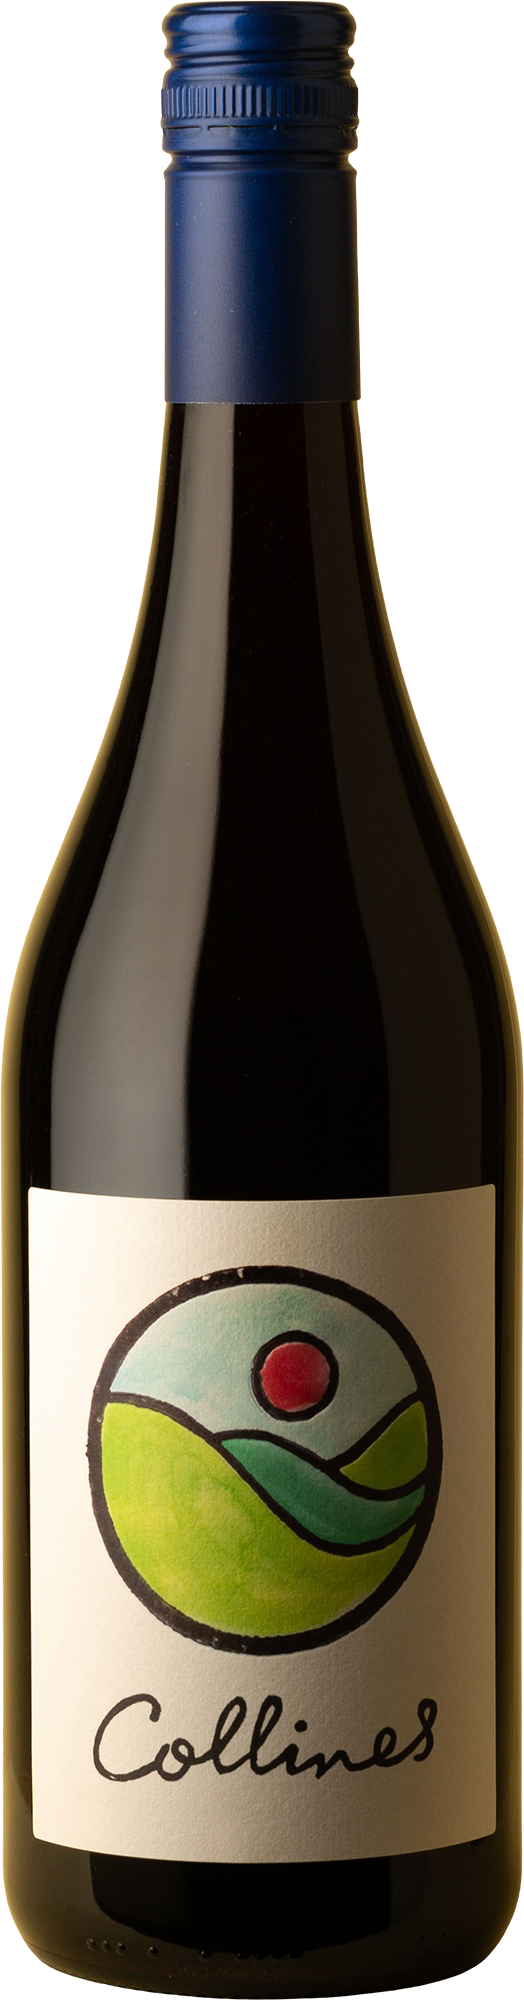 Les Fruits - Collines Syrah 2021 Red Wine